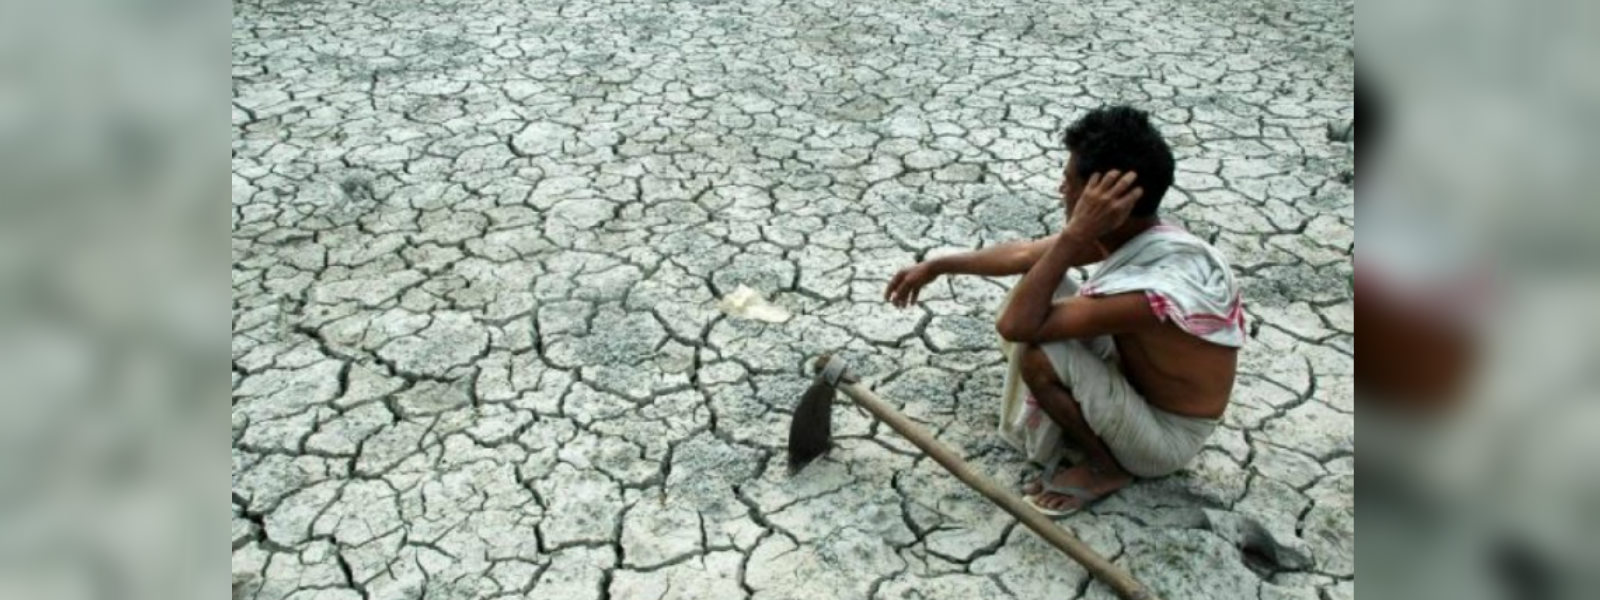 Around 600,000 families affected by drought